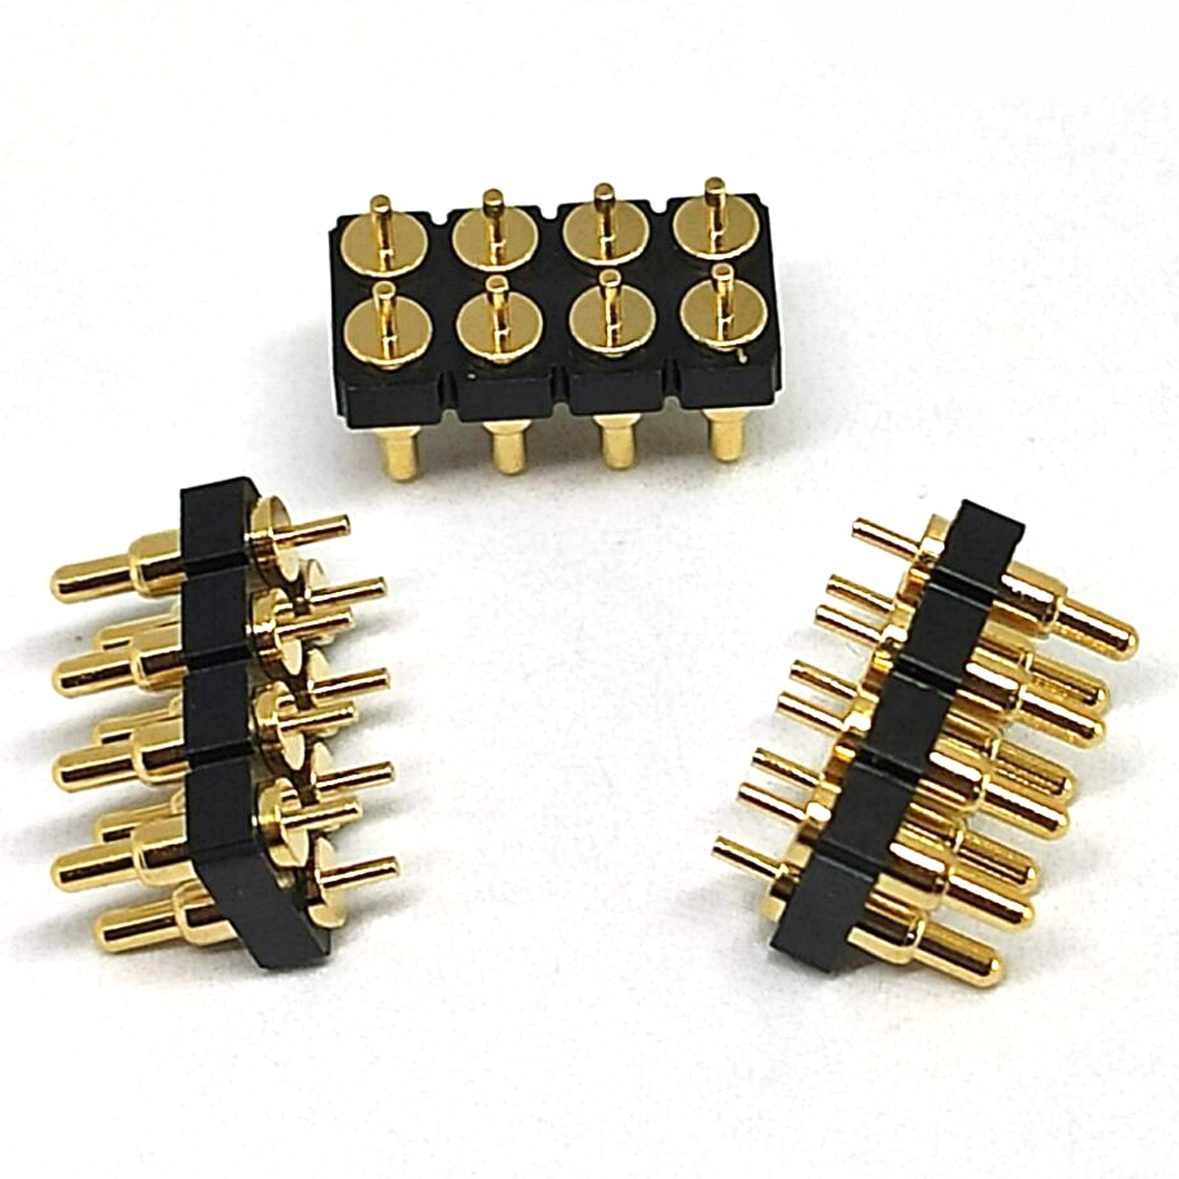 Spring loaded wire connectors are commonly used in various applications where a fast and tool-free connection is needed. 